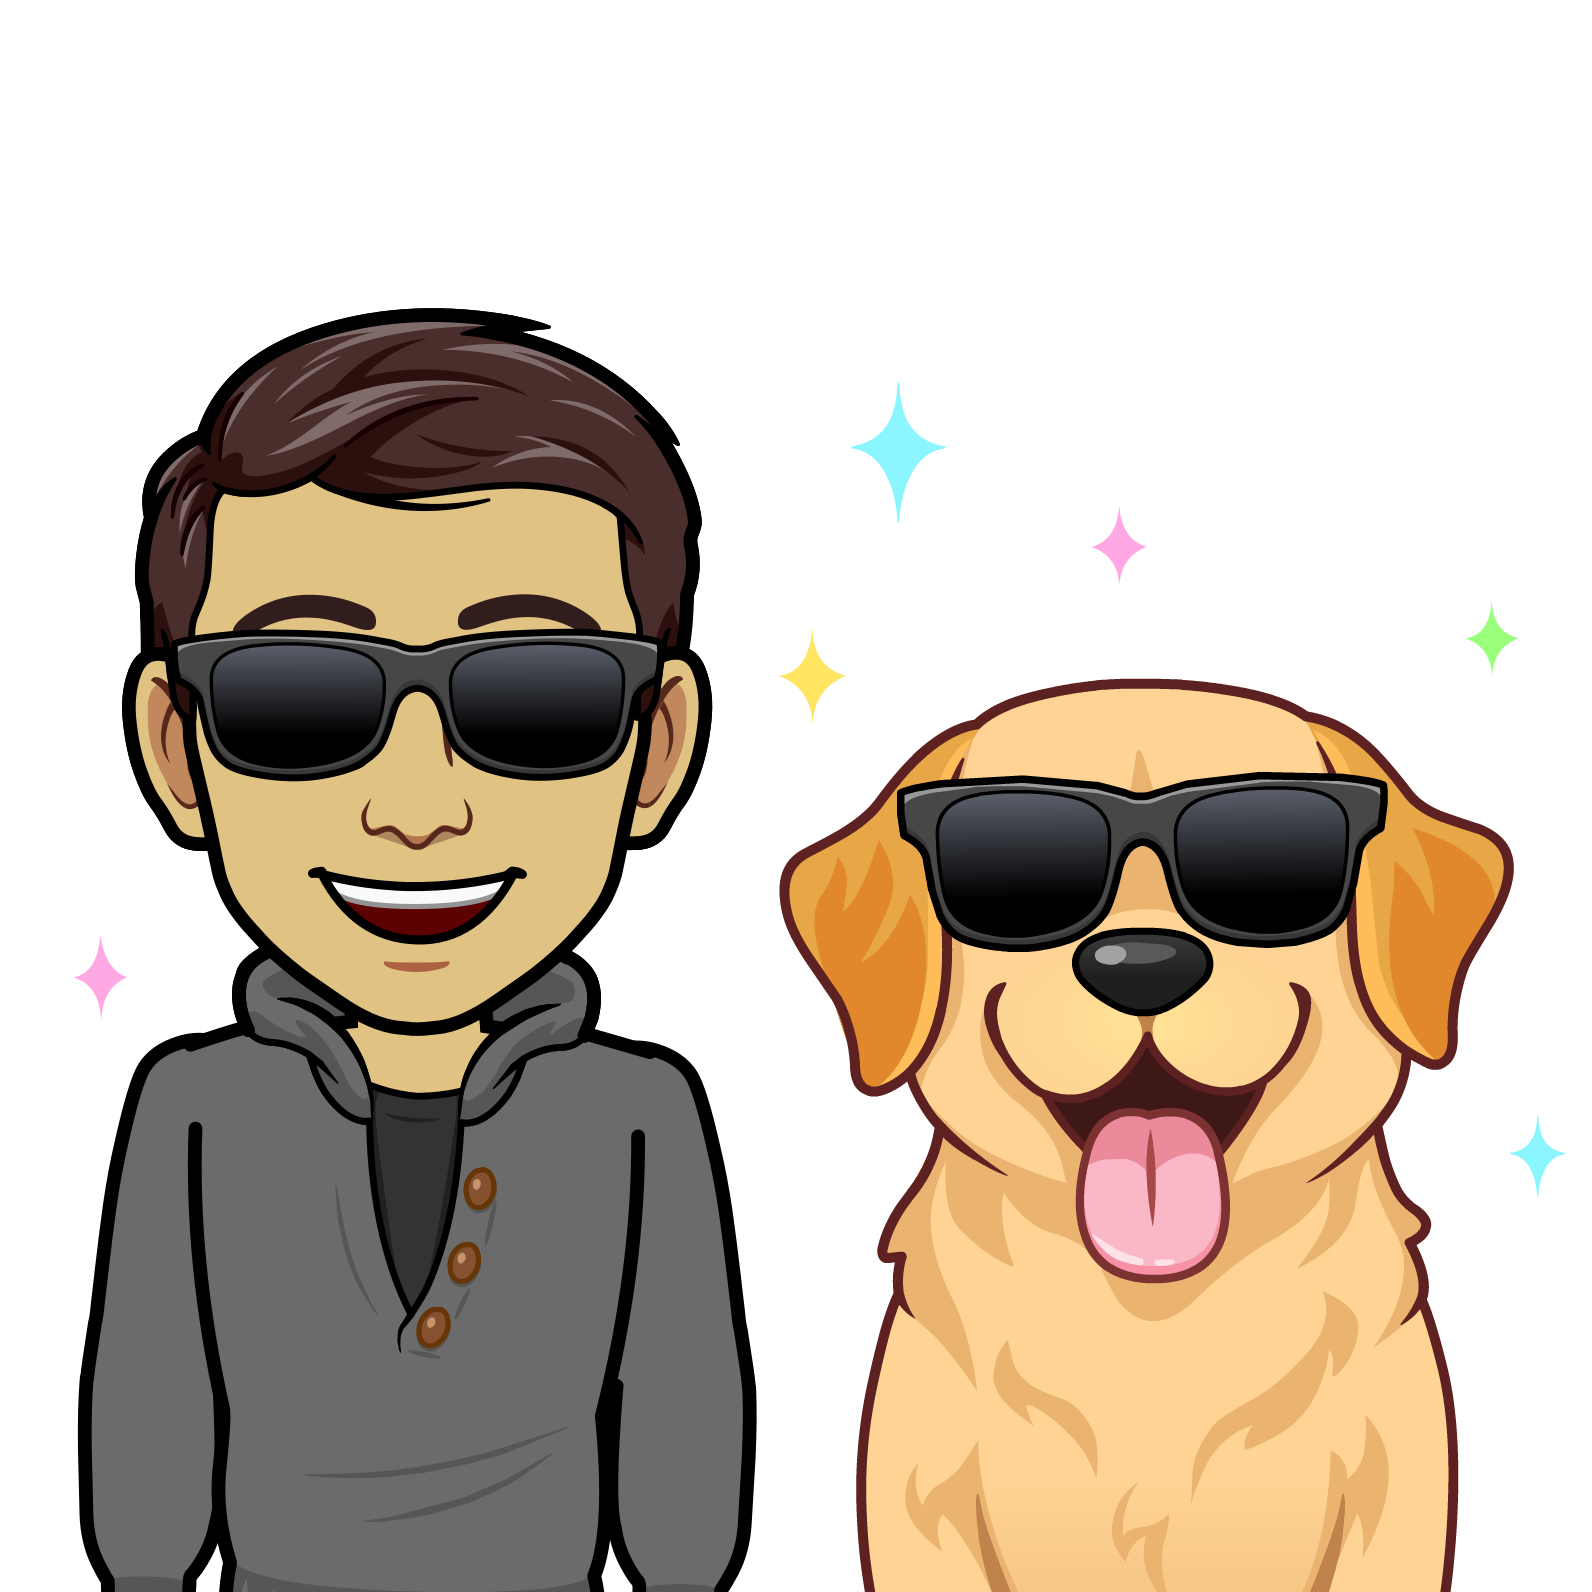 bitmoji (cartoon-like) photo of a young man with brown hair and a tan-colored fluffy dog, both wearing sunglasses